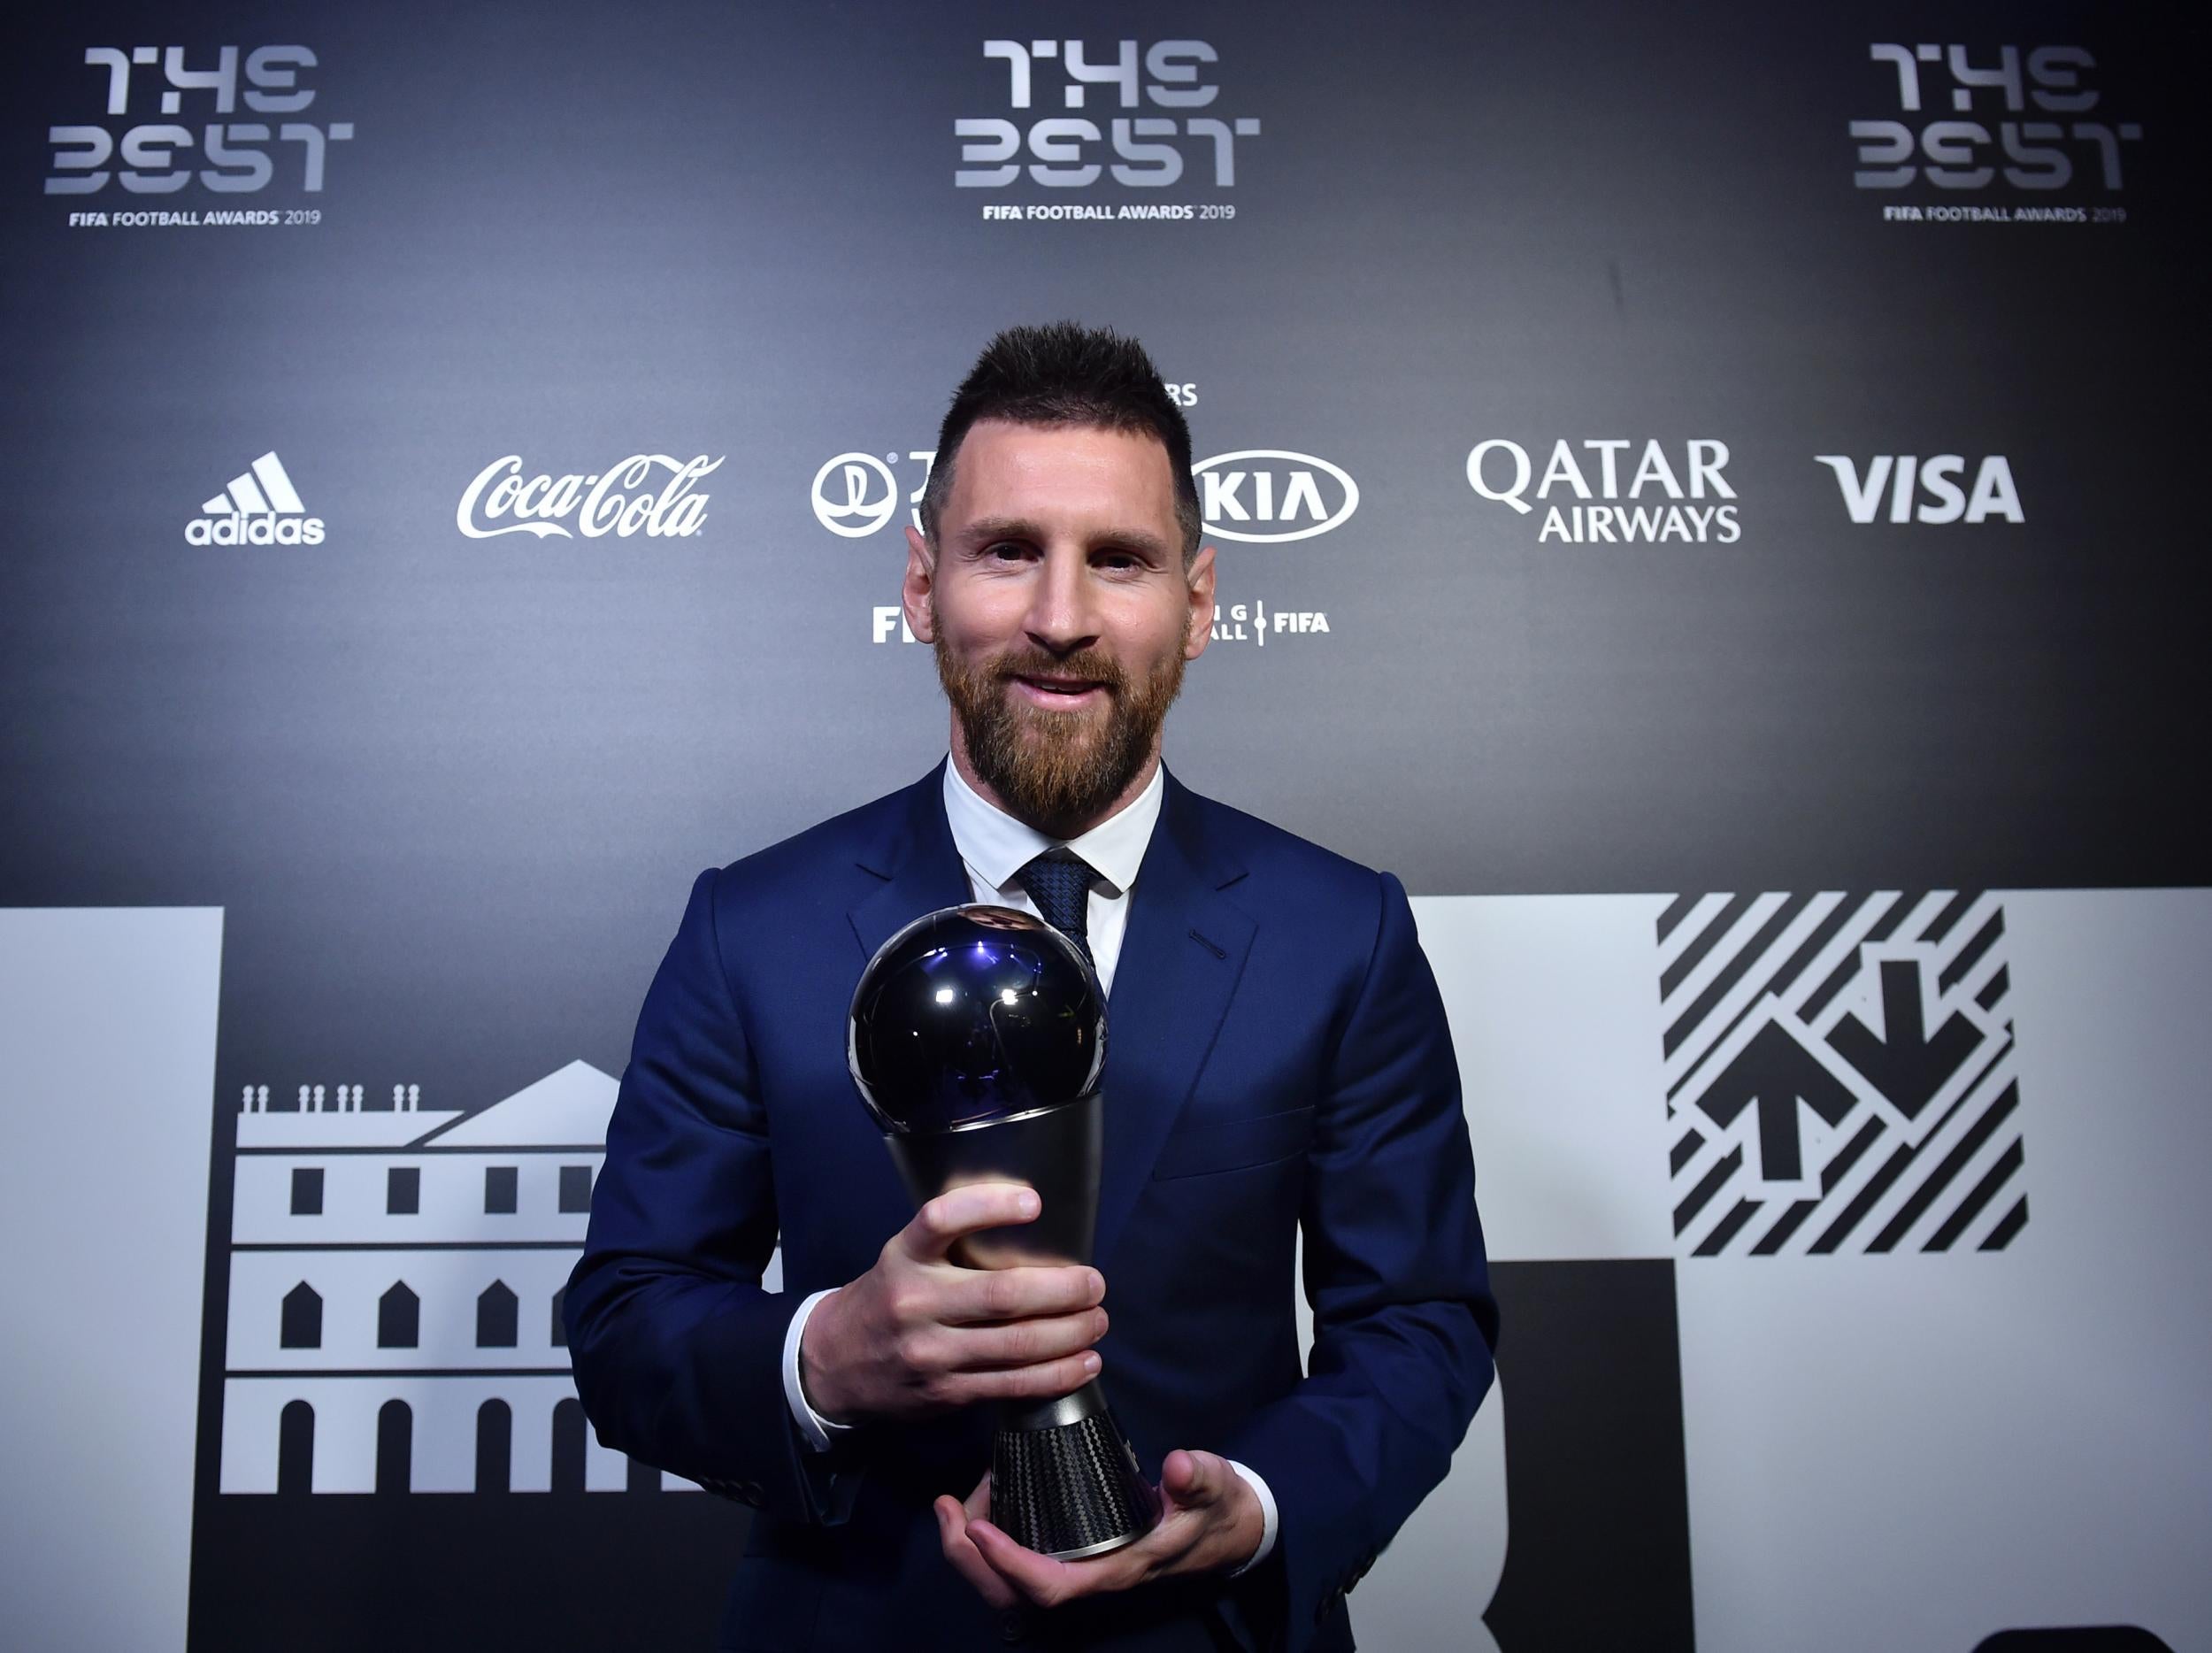 Lionel Messi could feature after winning The Best men's player on Monday